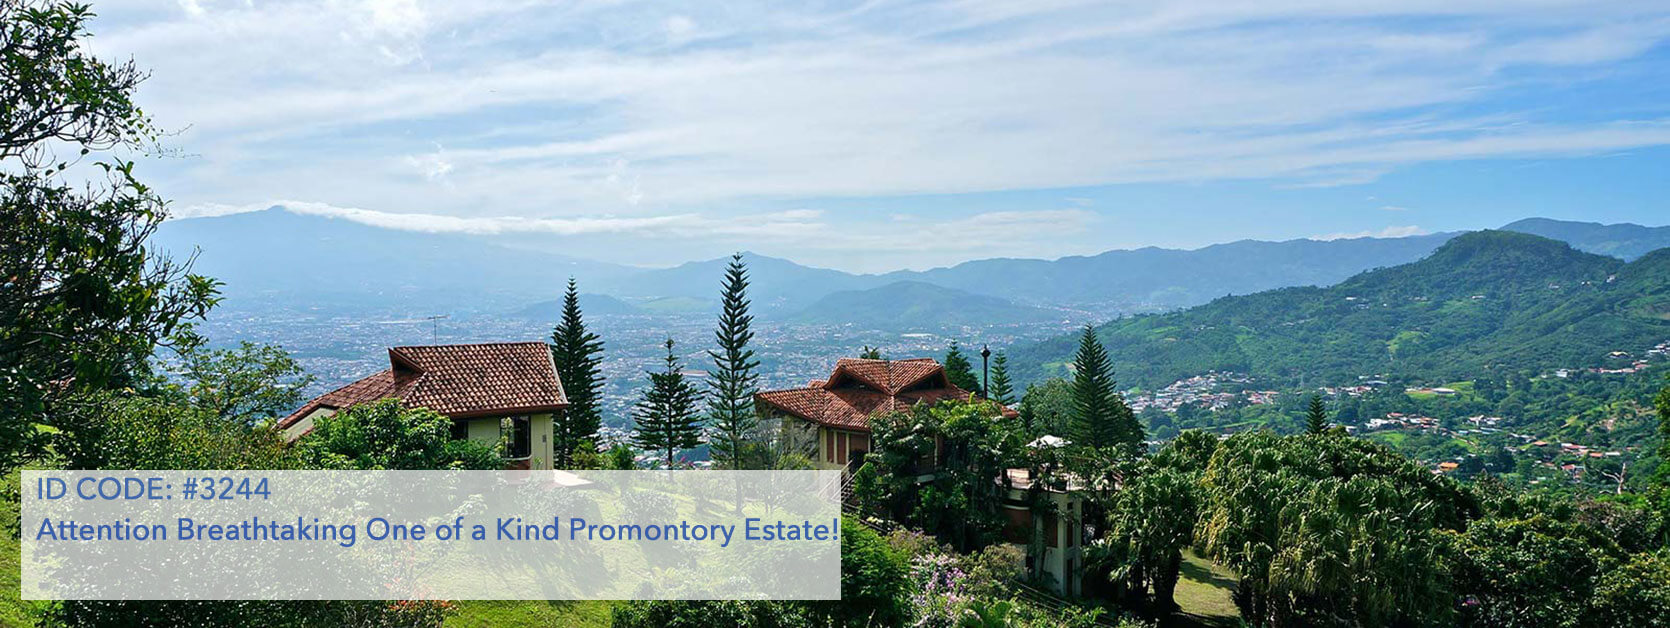 Attention Breathtaking One-of-a-Kind Promontory Estate!